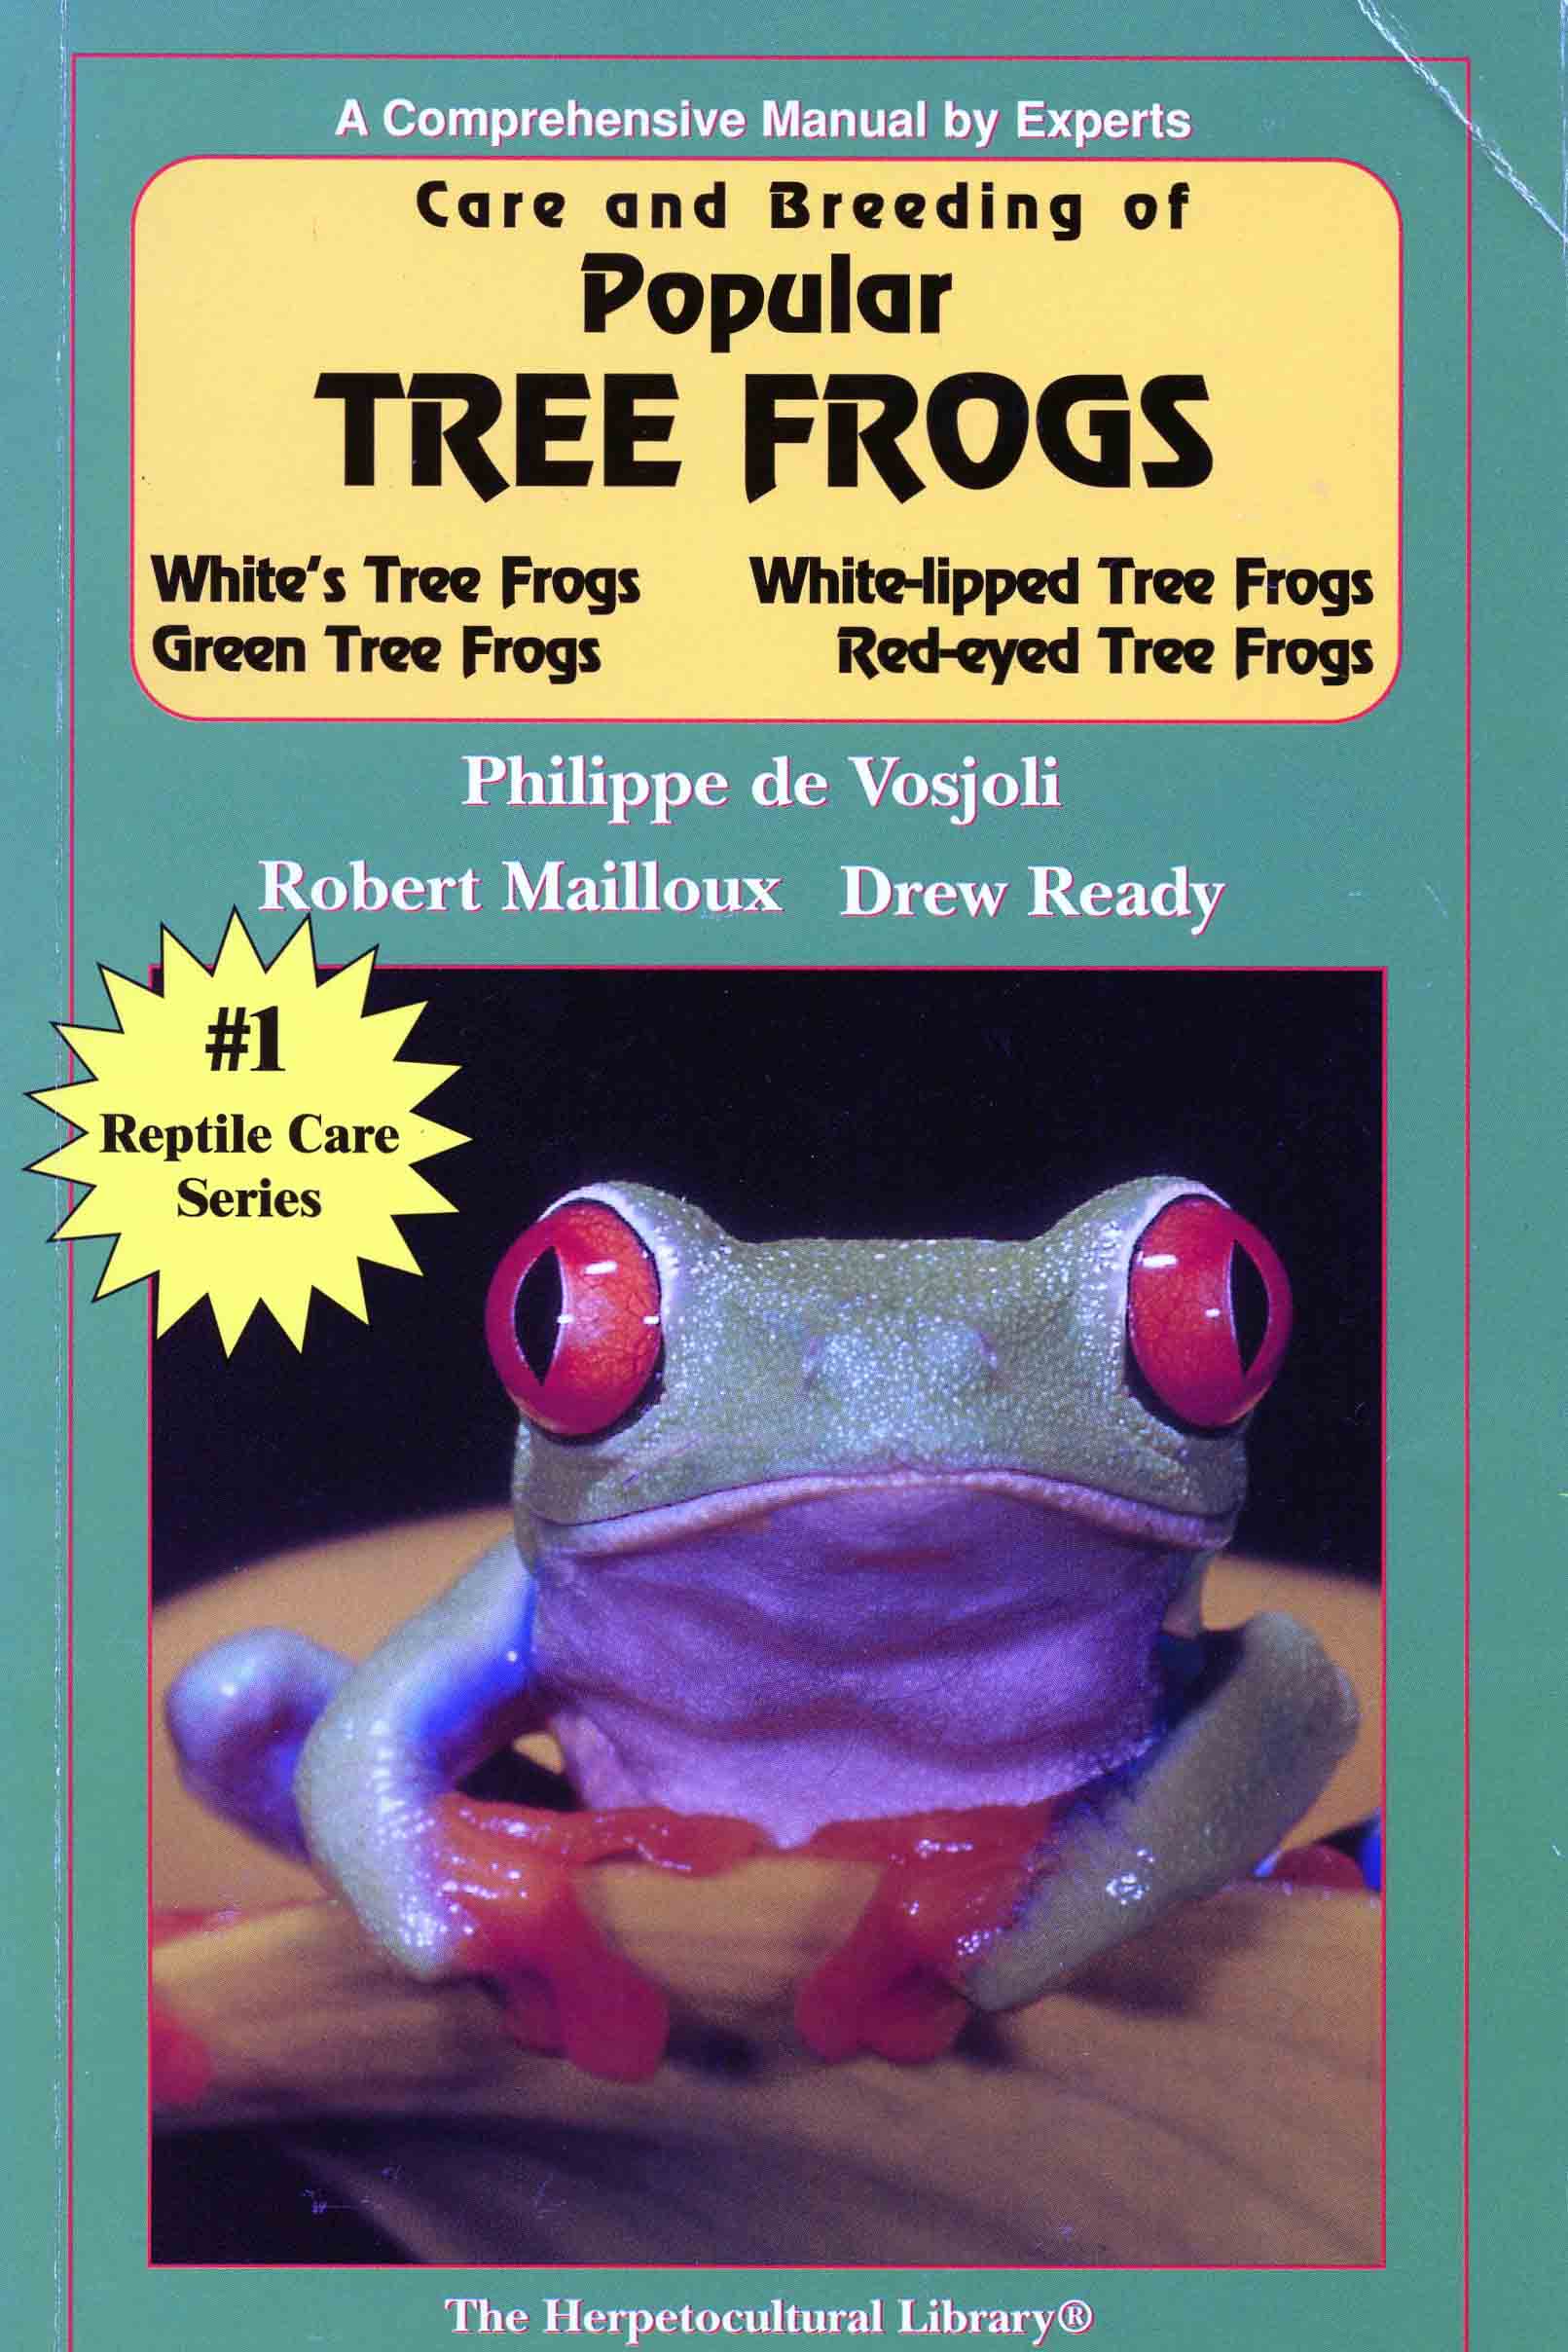 Image for Care and Breeding of Popular Tree Frogs: White’s Tree Frogs, Green Tree Frogs, While-Lipped Tree Frogs, Red Eyed Tree Frogs,